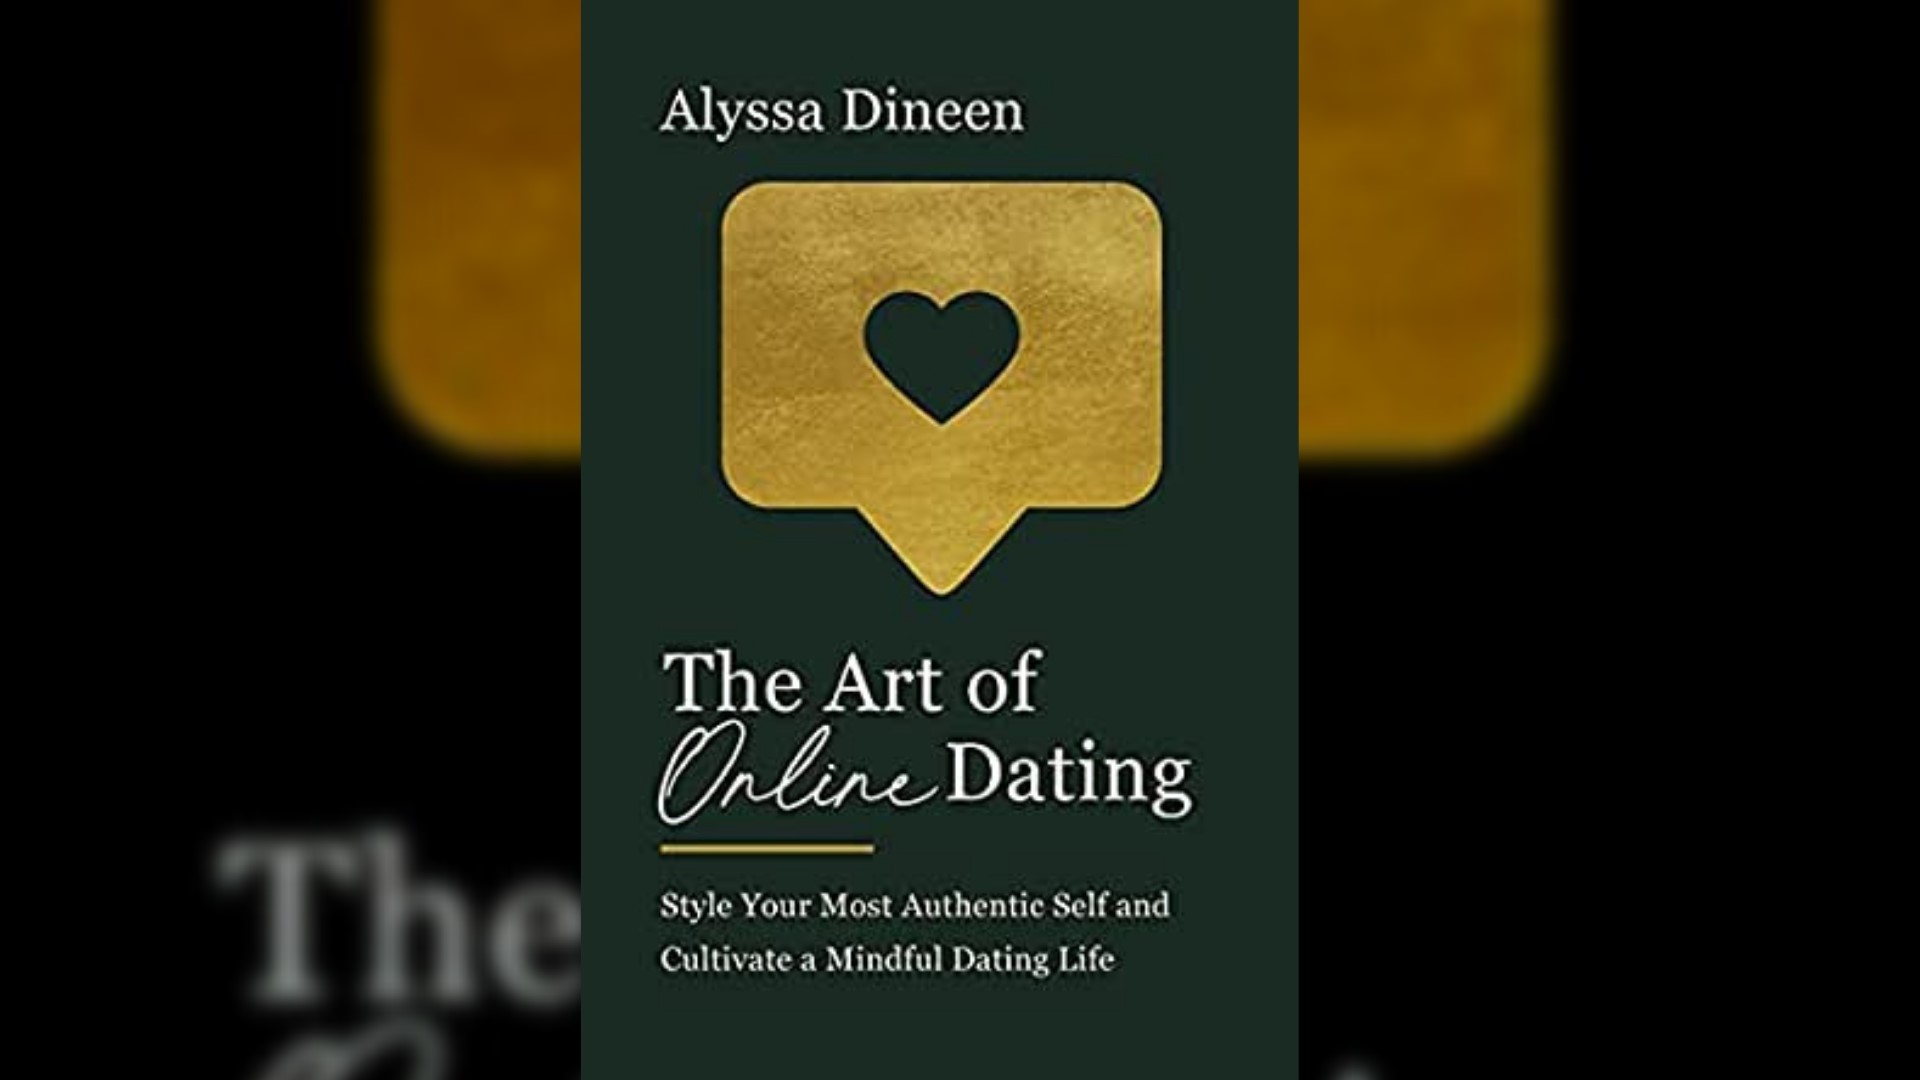 Fashion stylist and author Alyssa Dineen joined New Day NW to share tips from her new book, "The Art of Online Dating." #newdaynw